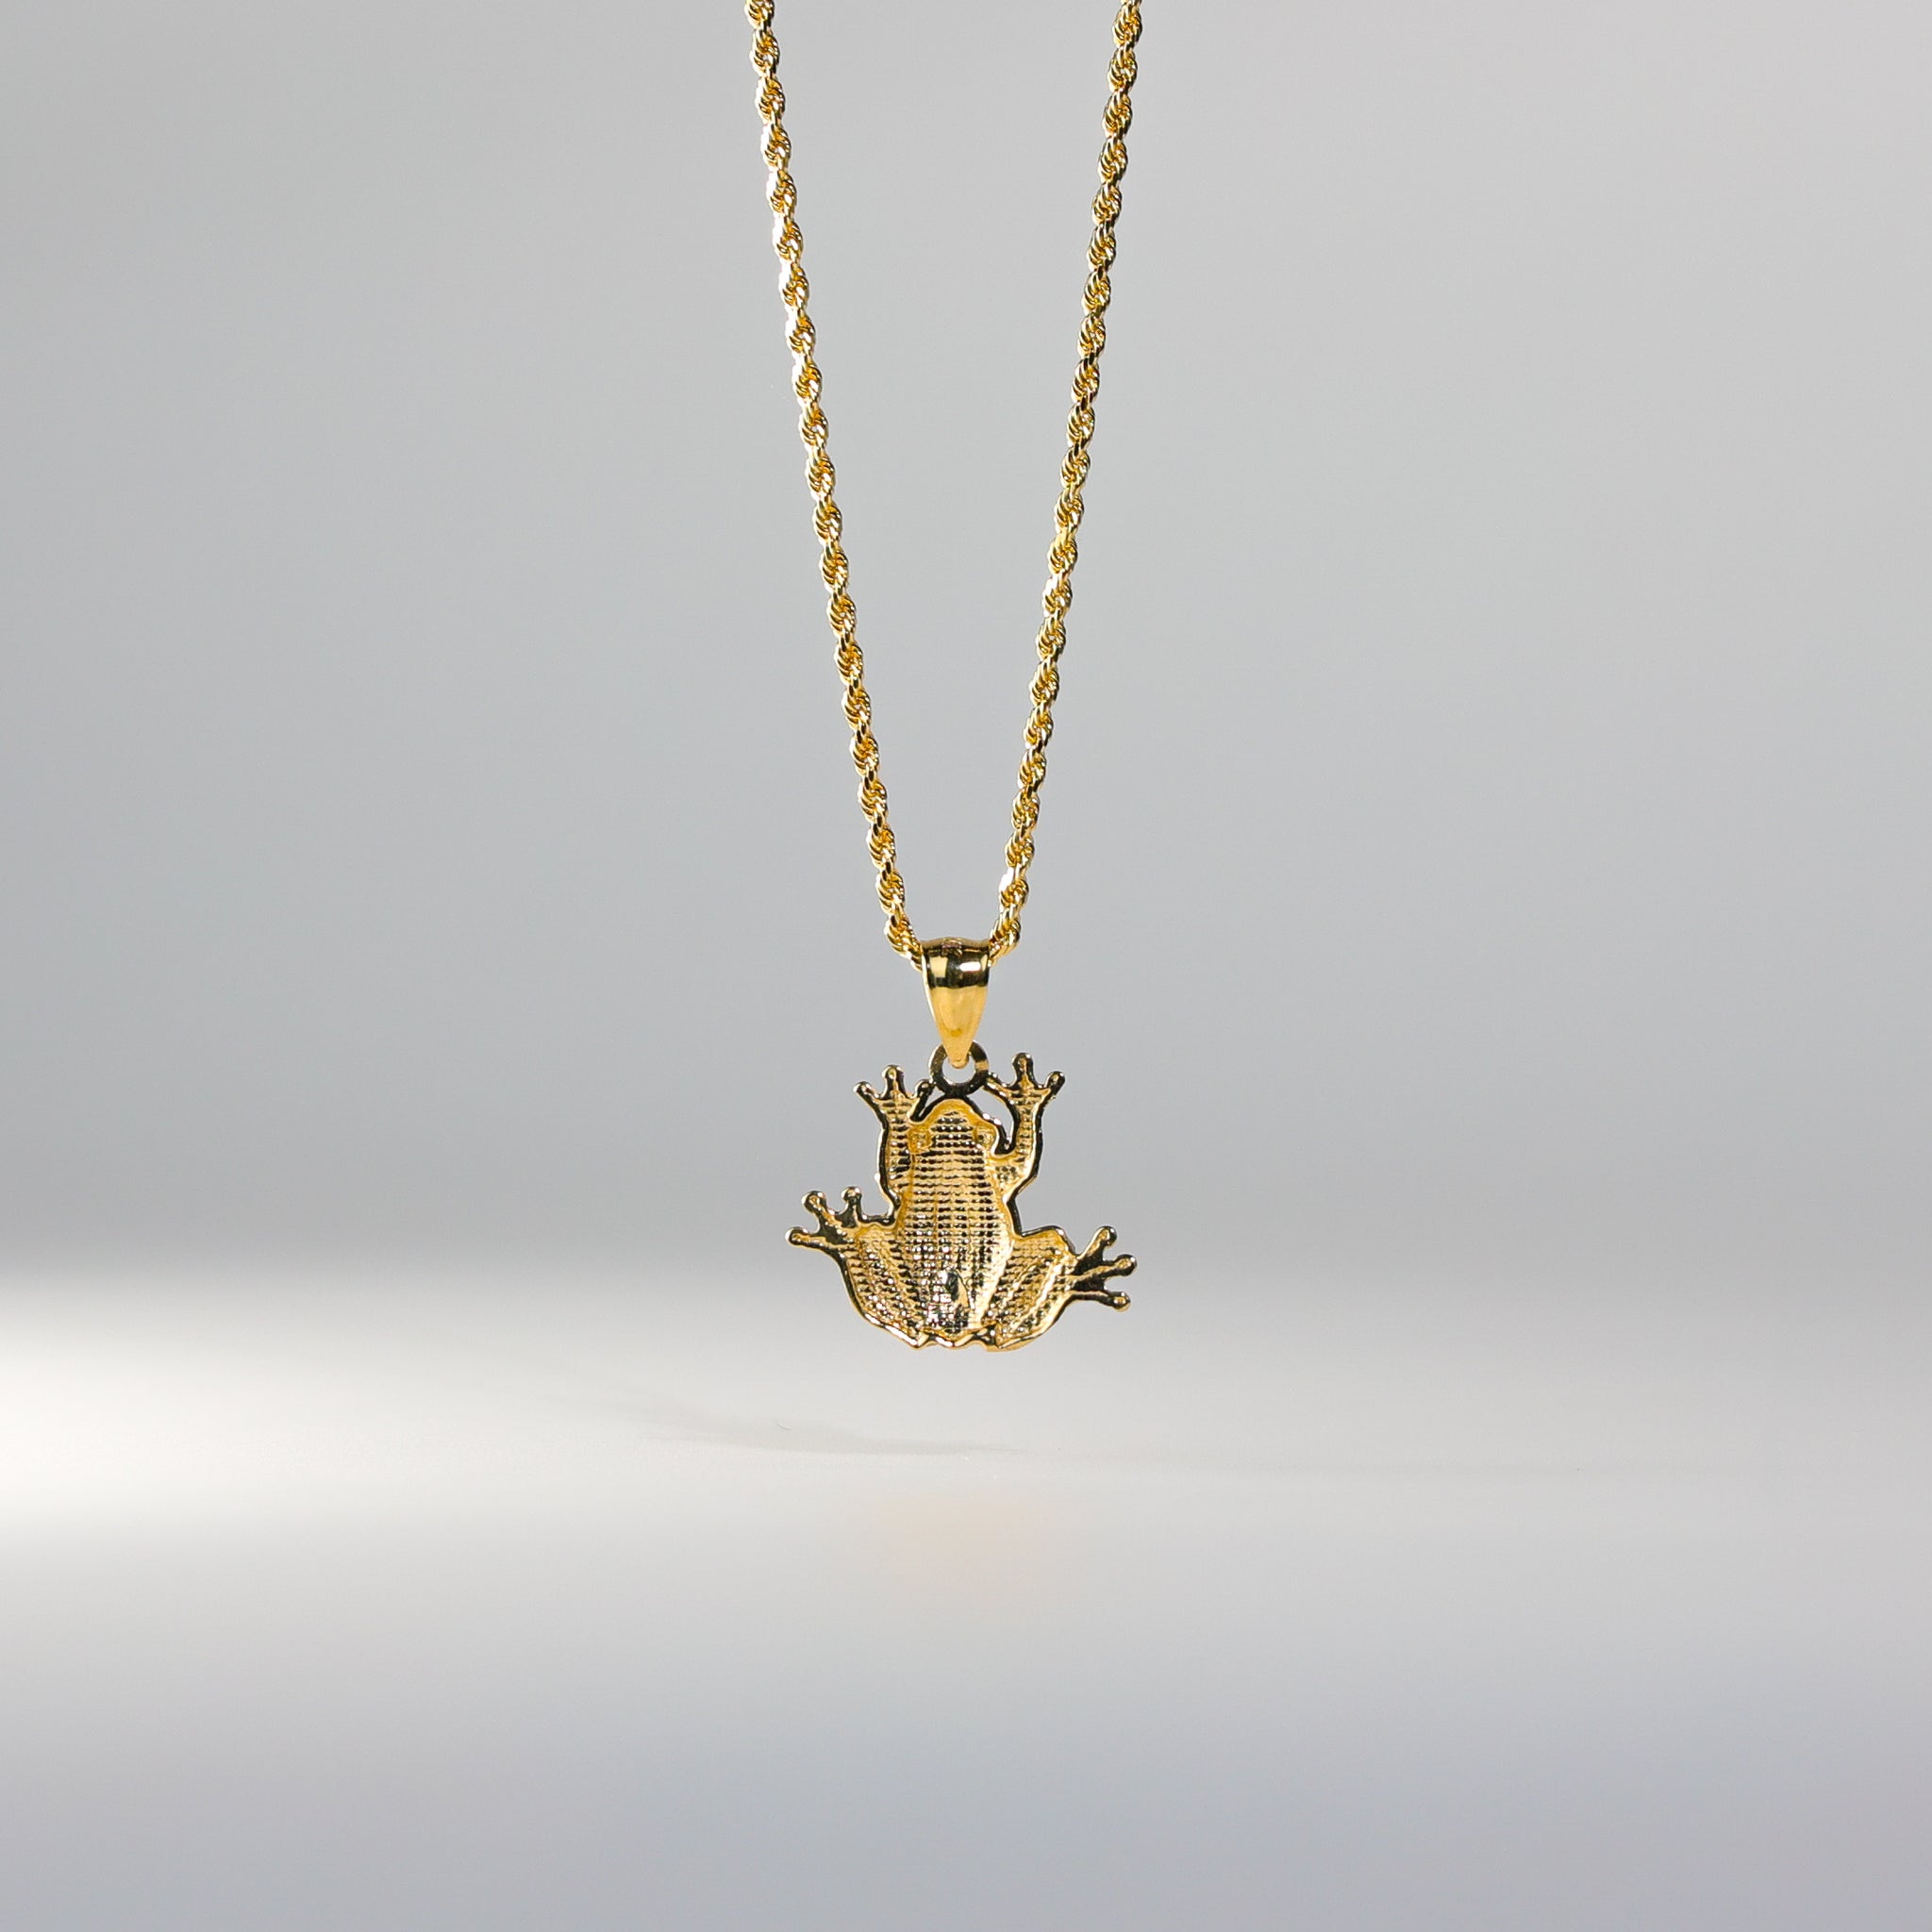 Gold Frog Pendant Model-1681 - Charlie & Co. Jewelry